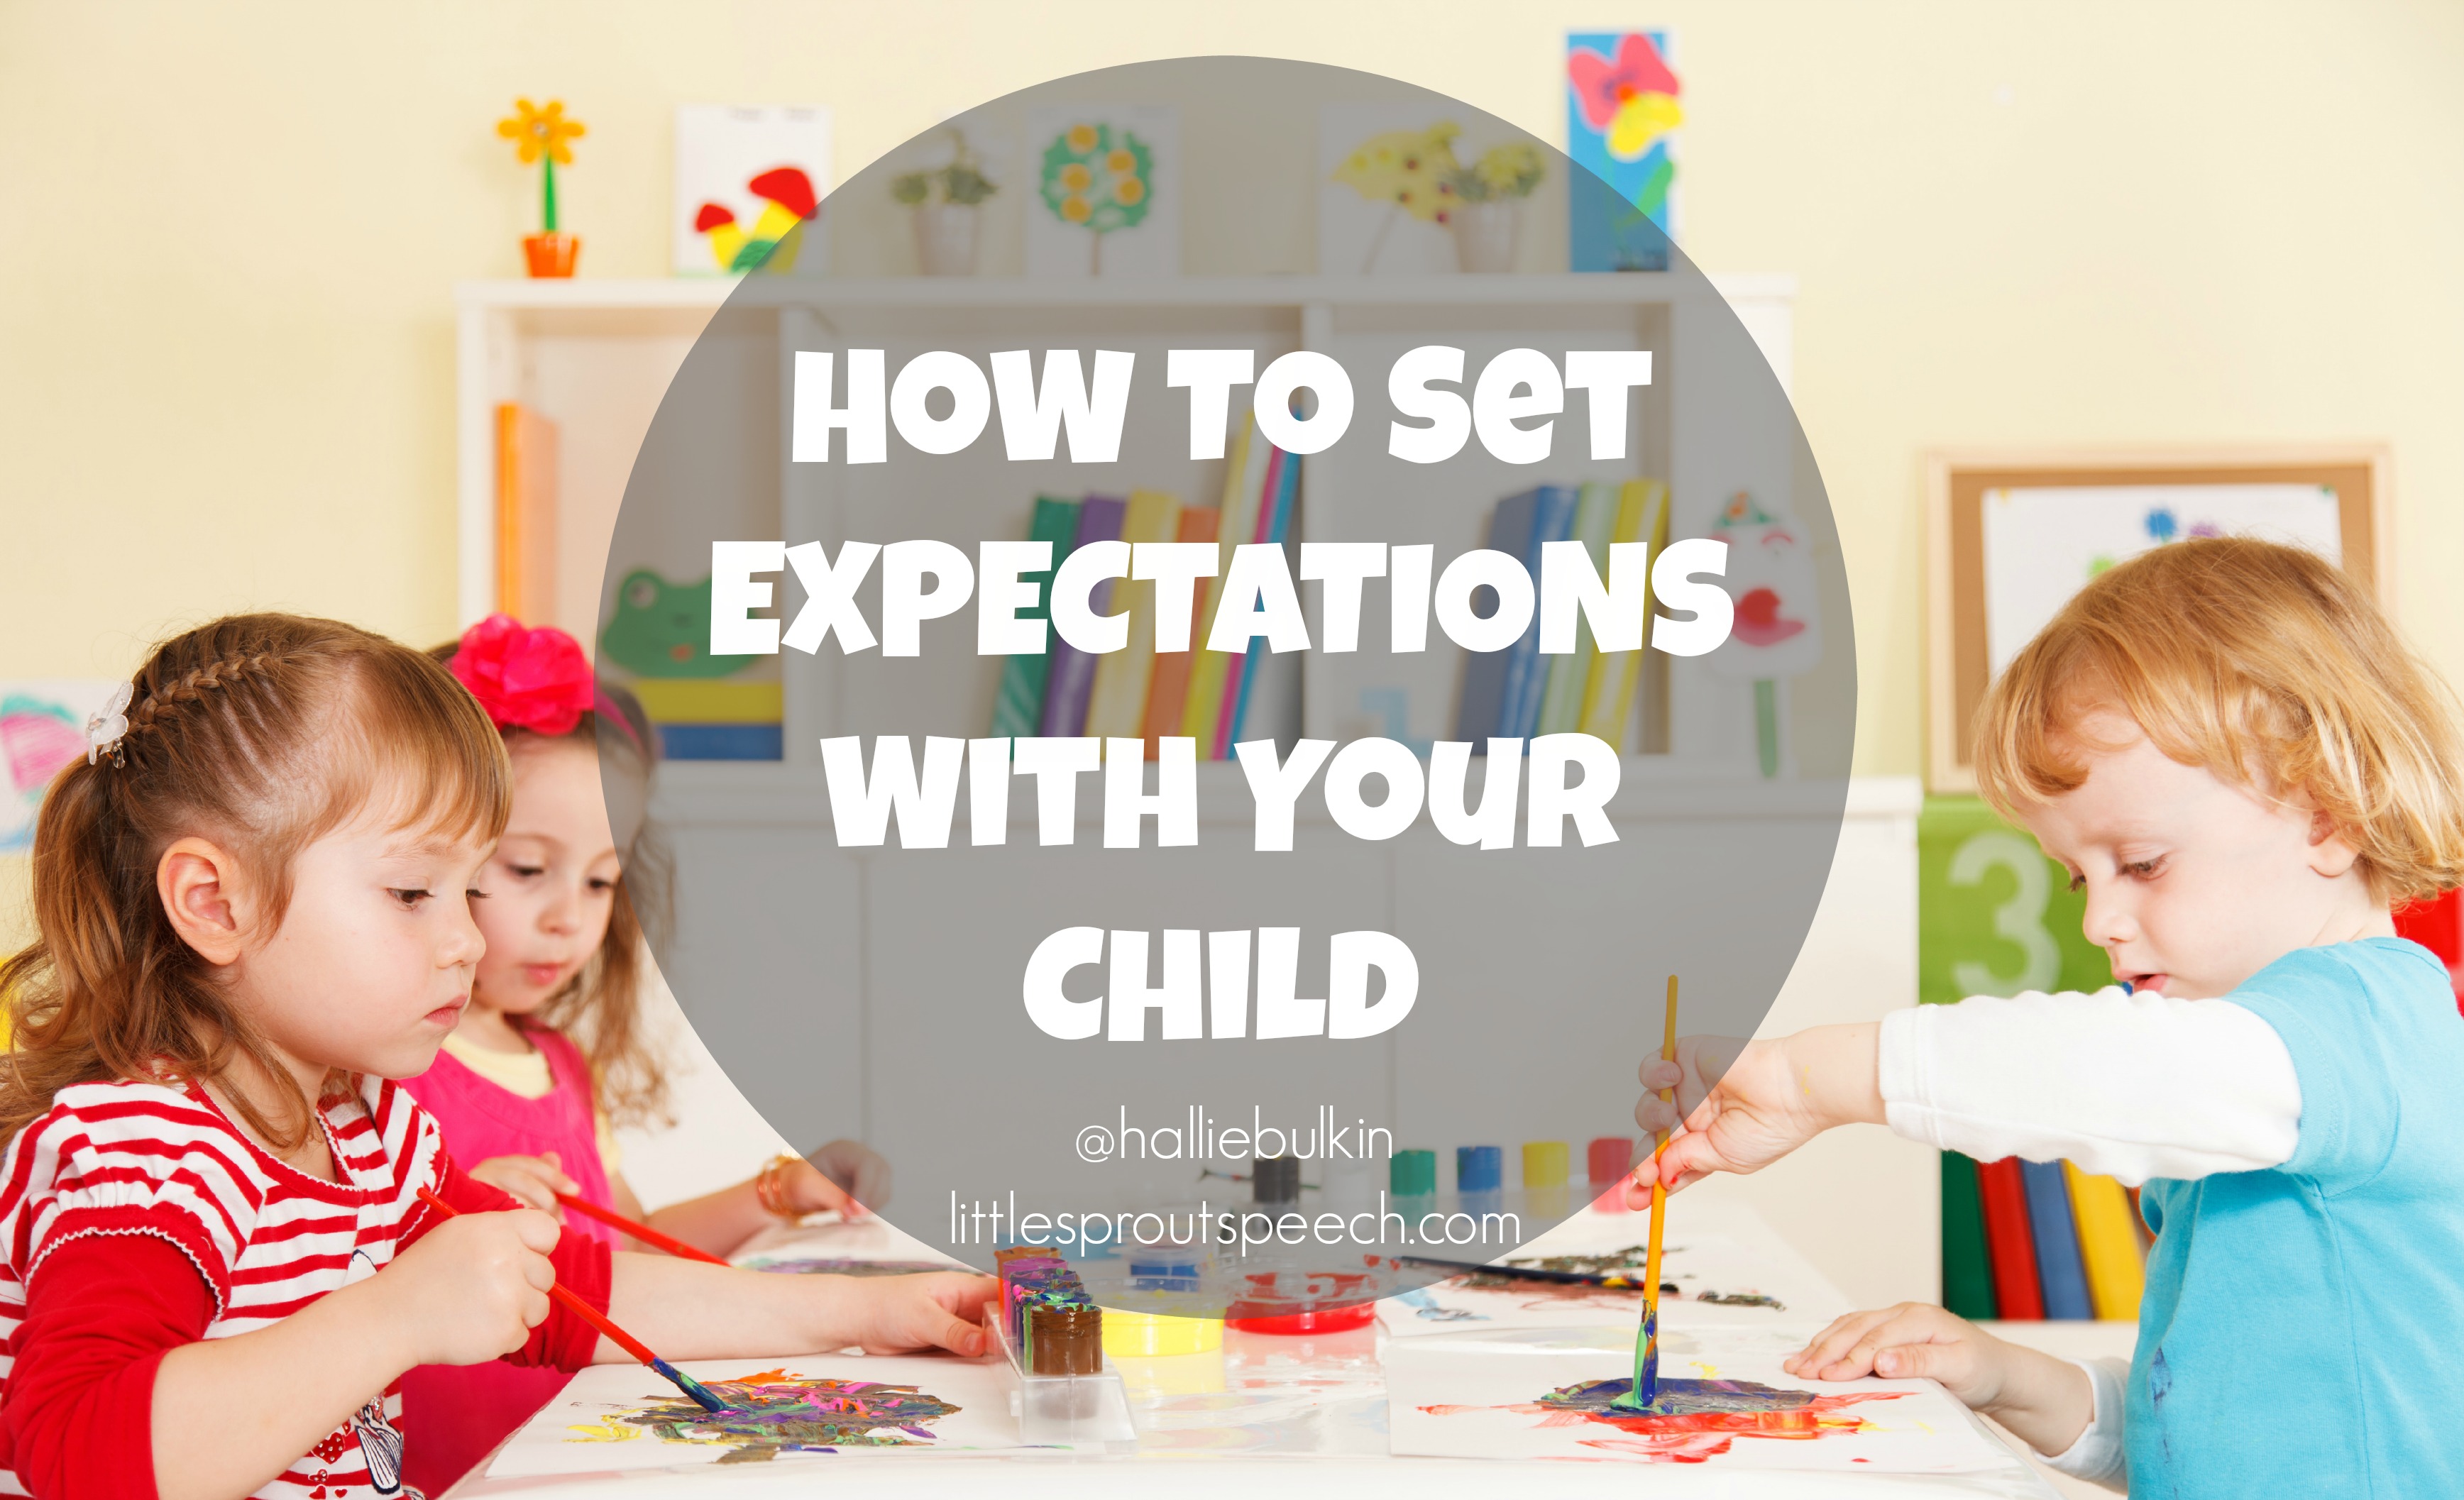 How To Set Expectations With Your Child